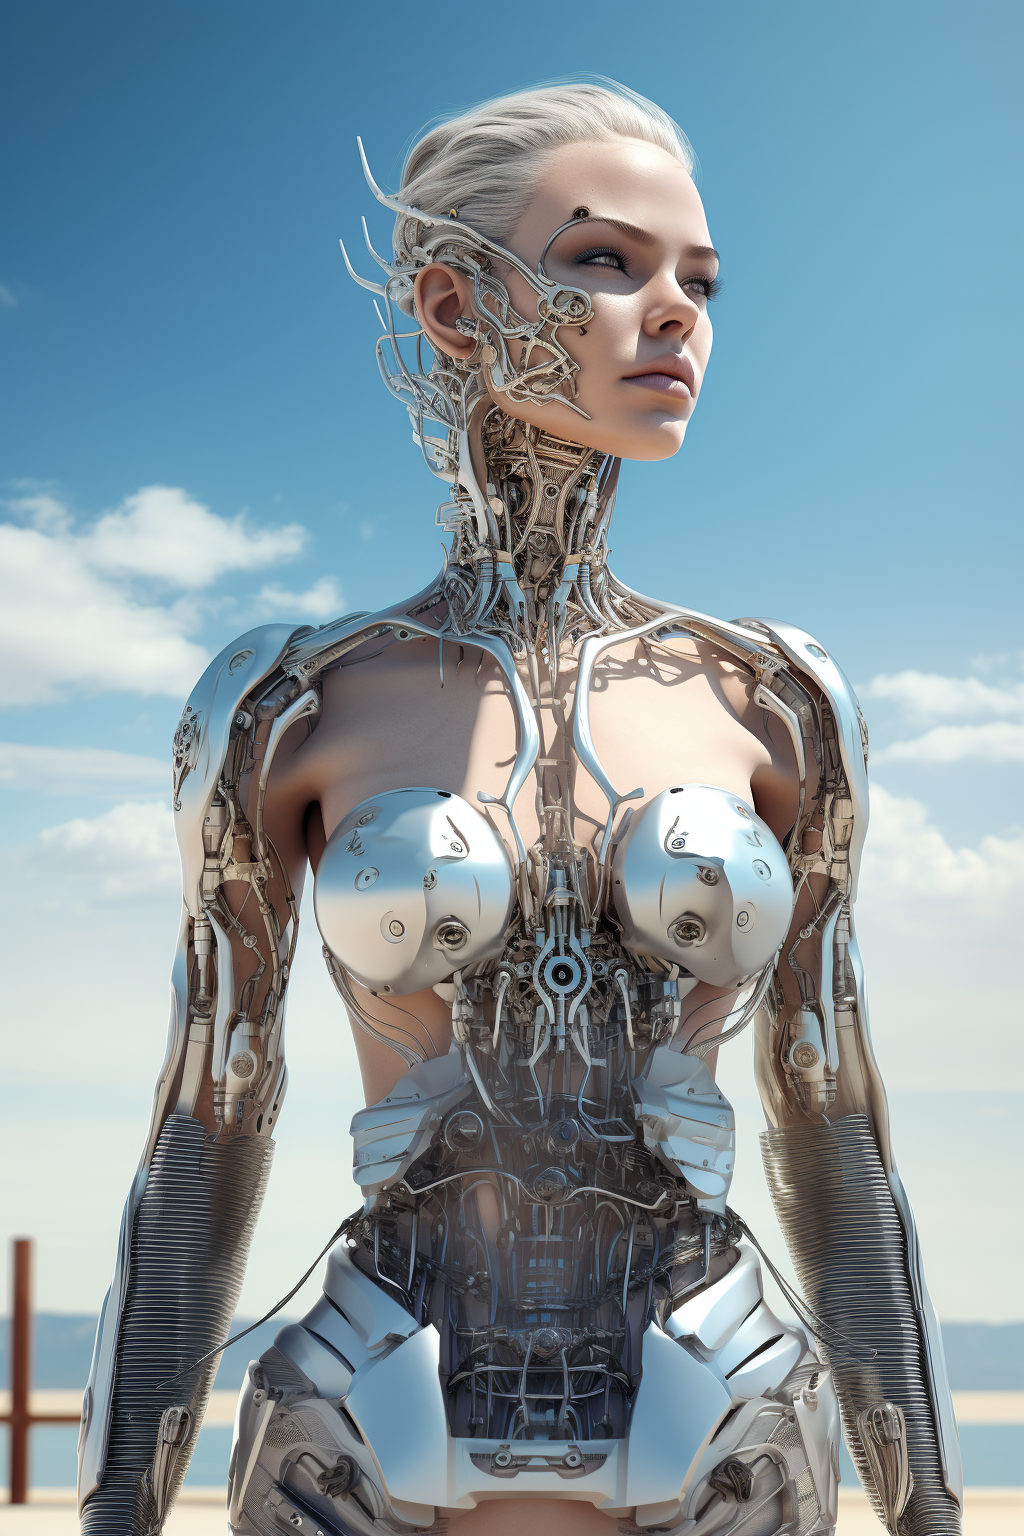 orestis_Beautiful_synthetic_cyborg_woman_standing_in_full_heigh_ee8344a7-8d7e-4756-978e-6e78a73ceadc.png